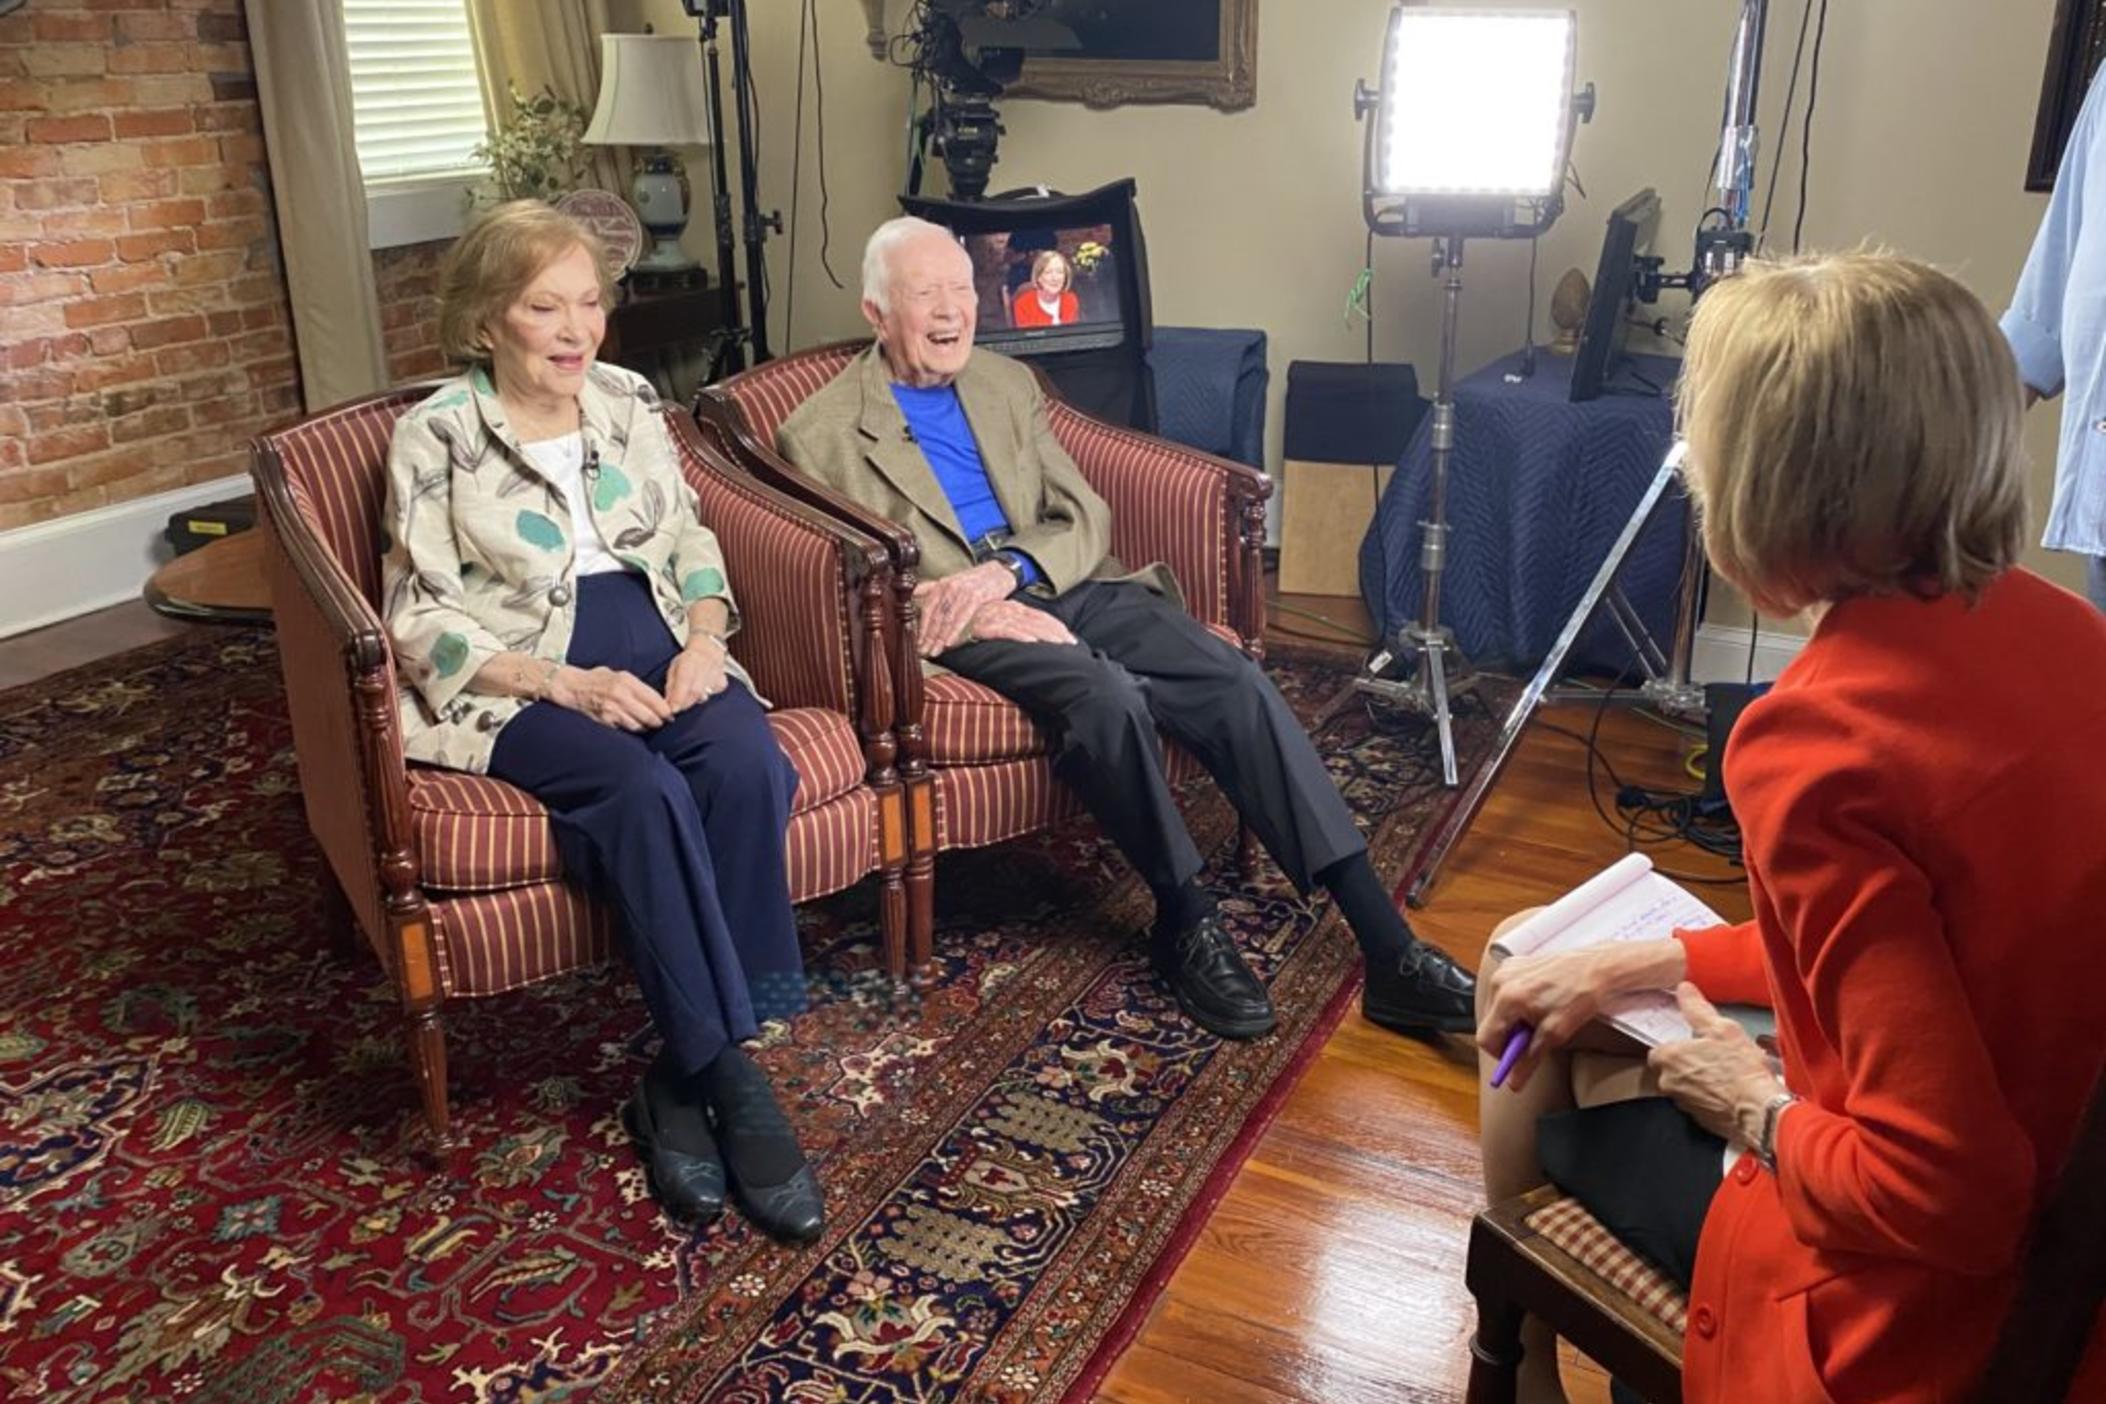 Jimmy and Rosalynn Carter reflect on 75 years of marriage, the state of American politics